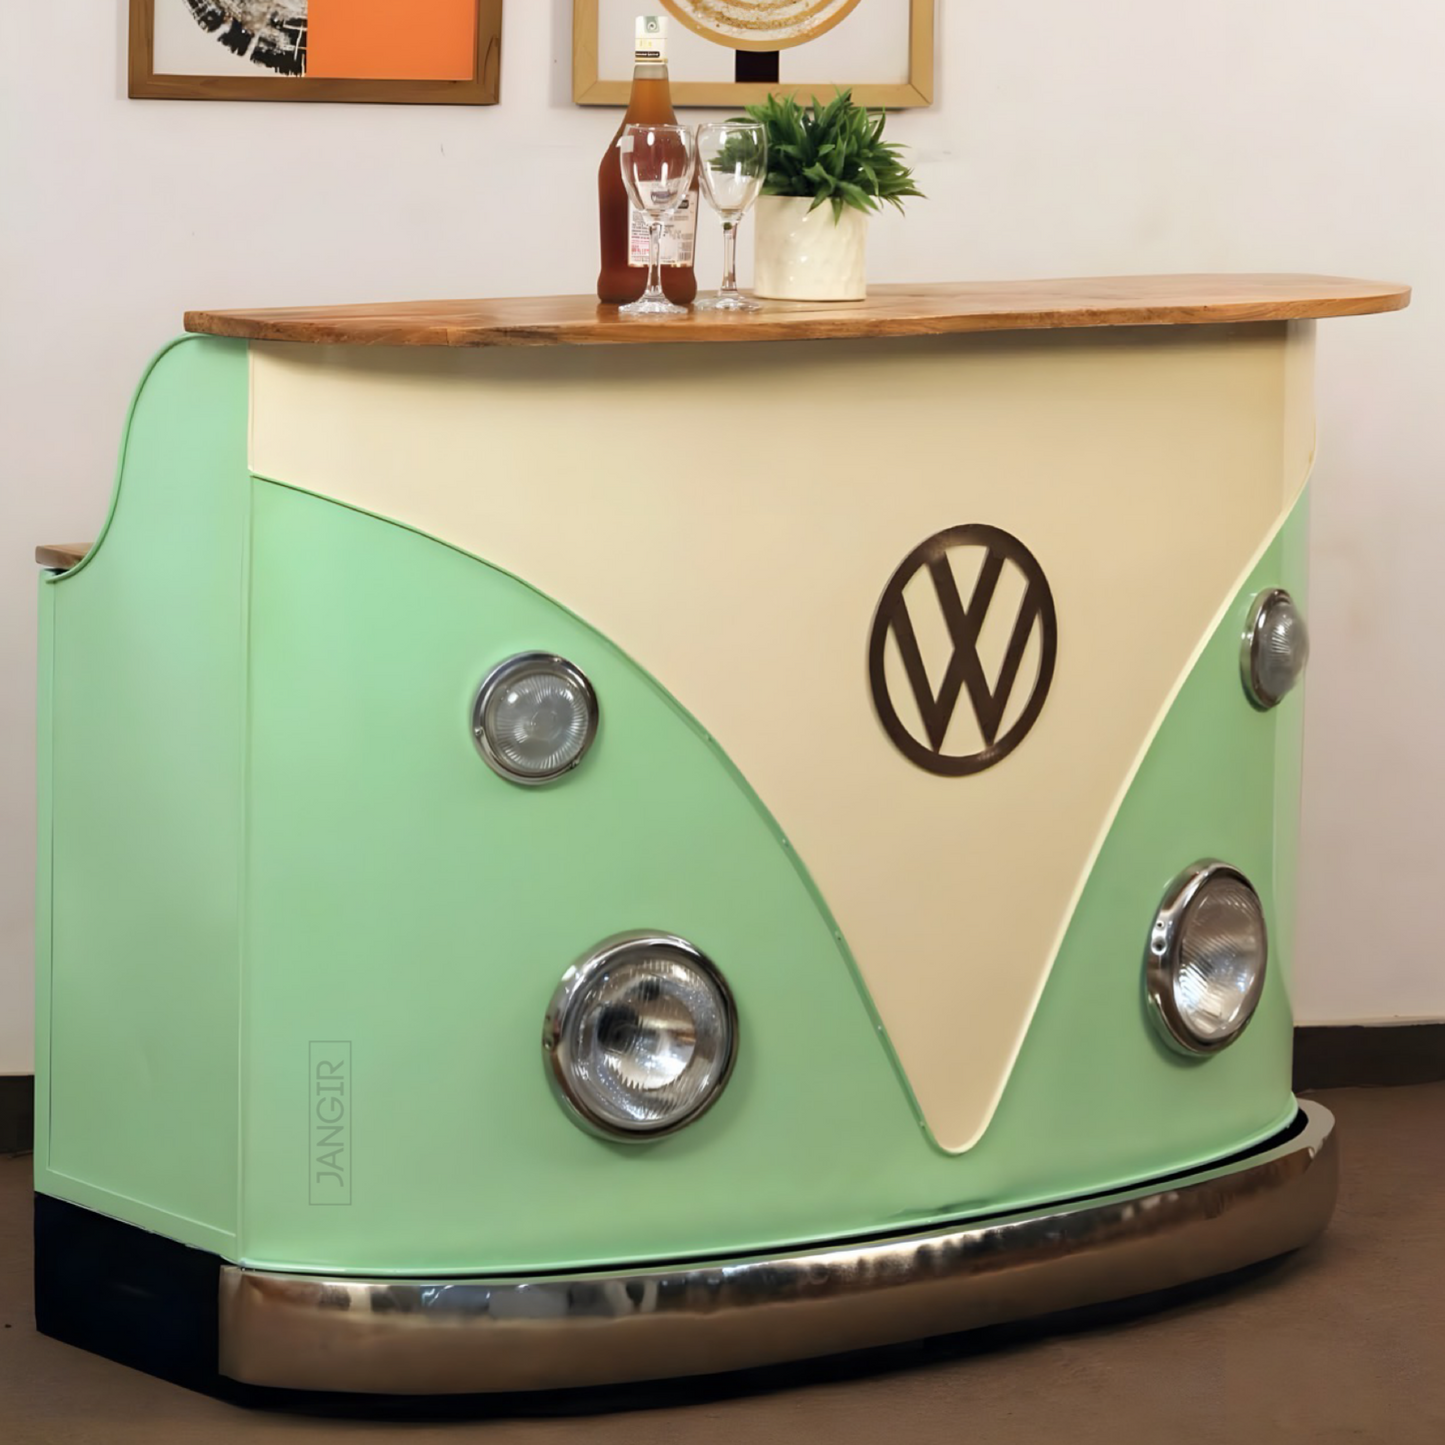 Elevate your home bar, reception or pub space with a unique and durable Vintage Volkswagen counter made from solid wood and metal. Perfect for entertaining guests, shop now!